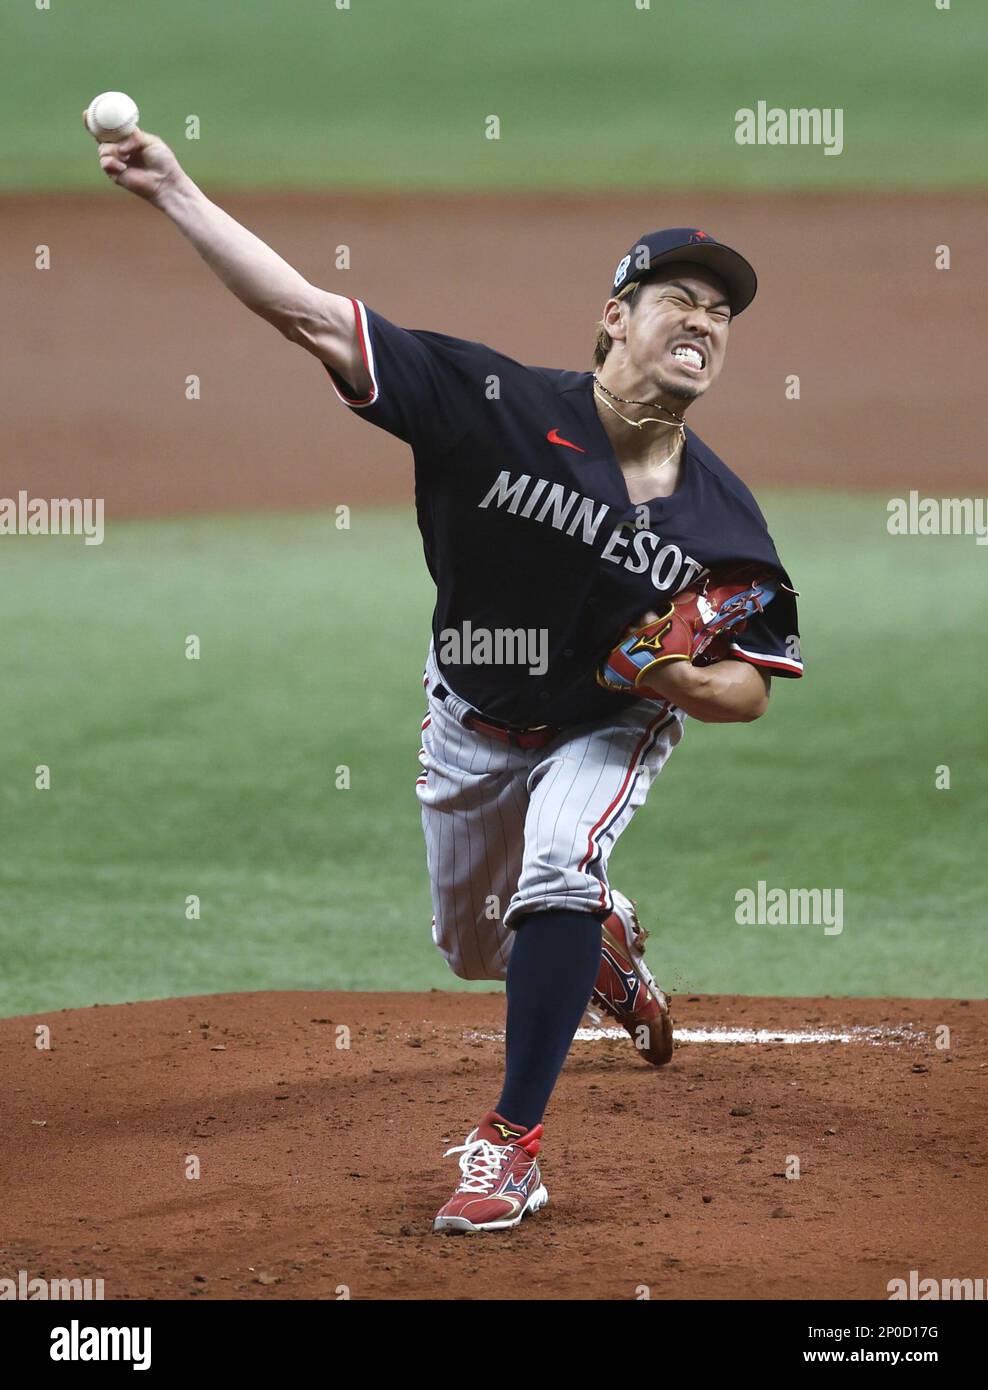 St. Petersburg, Florida. 02/03/2023, Kenta Maeda of the Minnesota Twins  meets the press after pitching in a spring training game against the Tampa  Bay Rays on March 2, 2023, in St. Petersburg